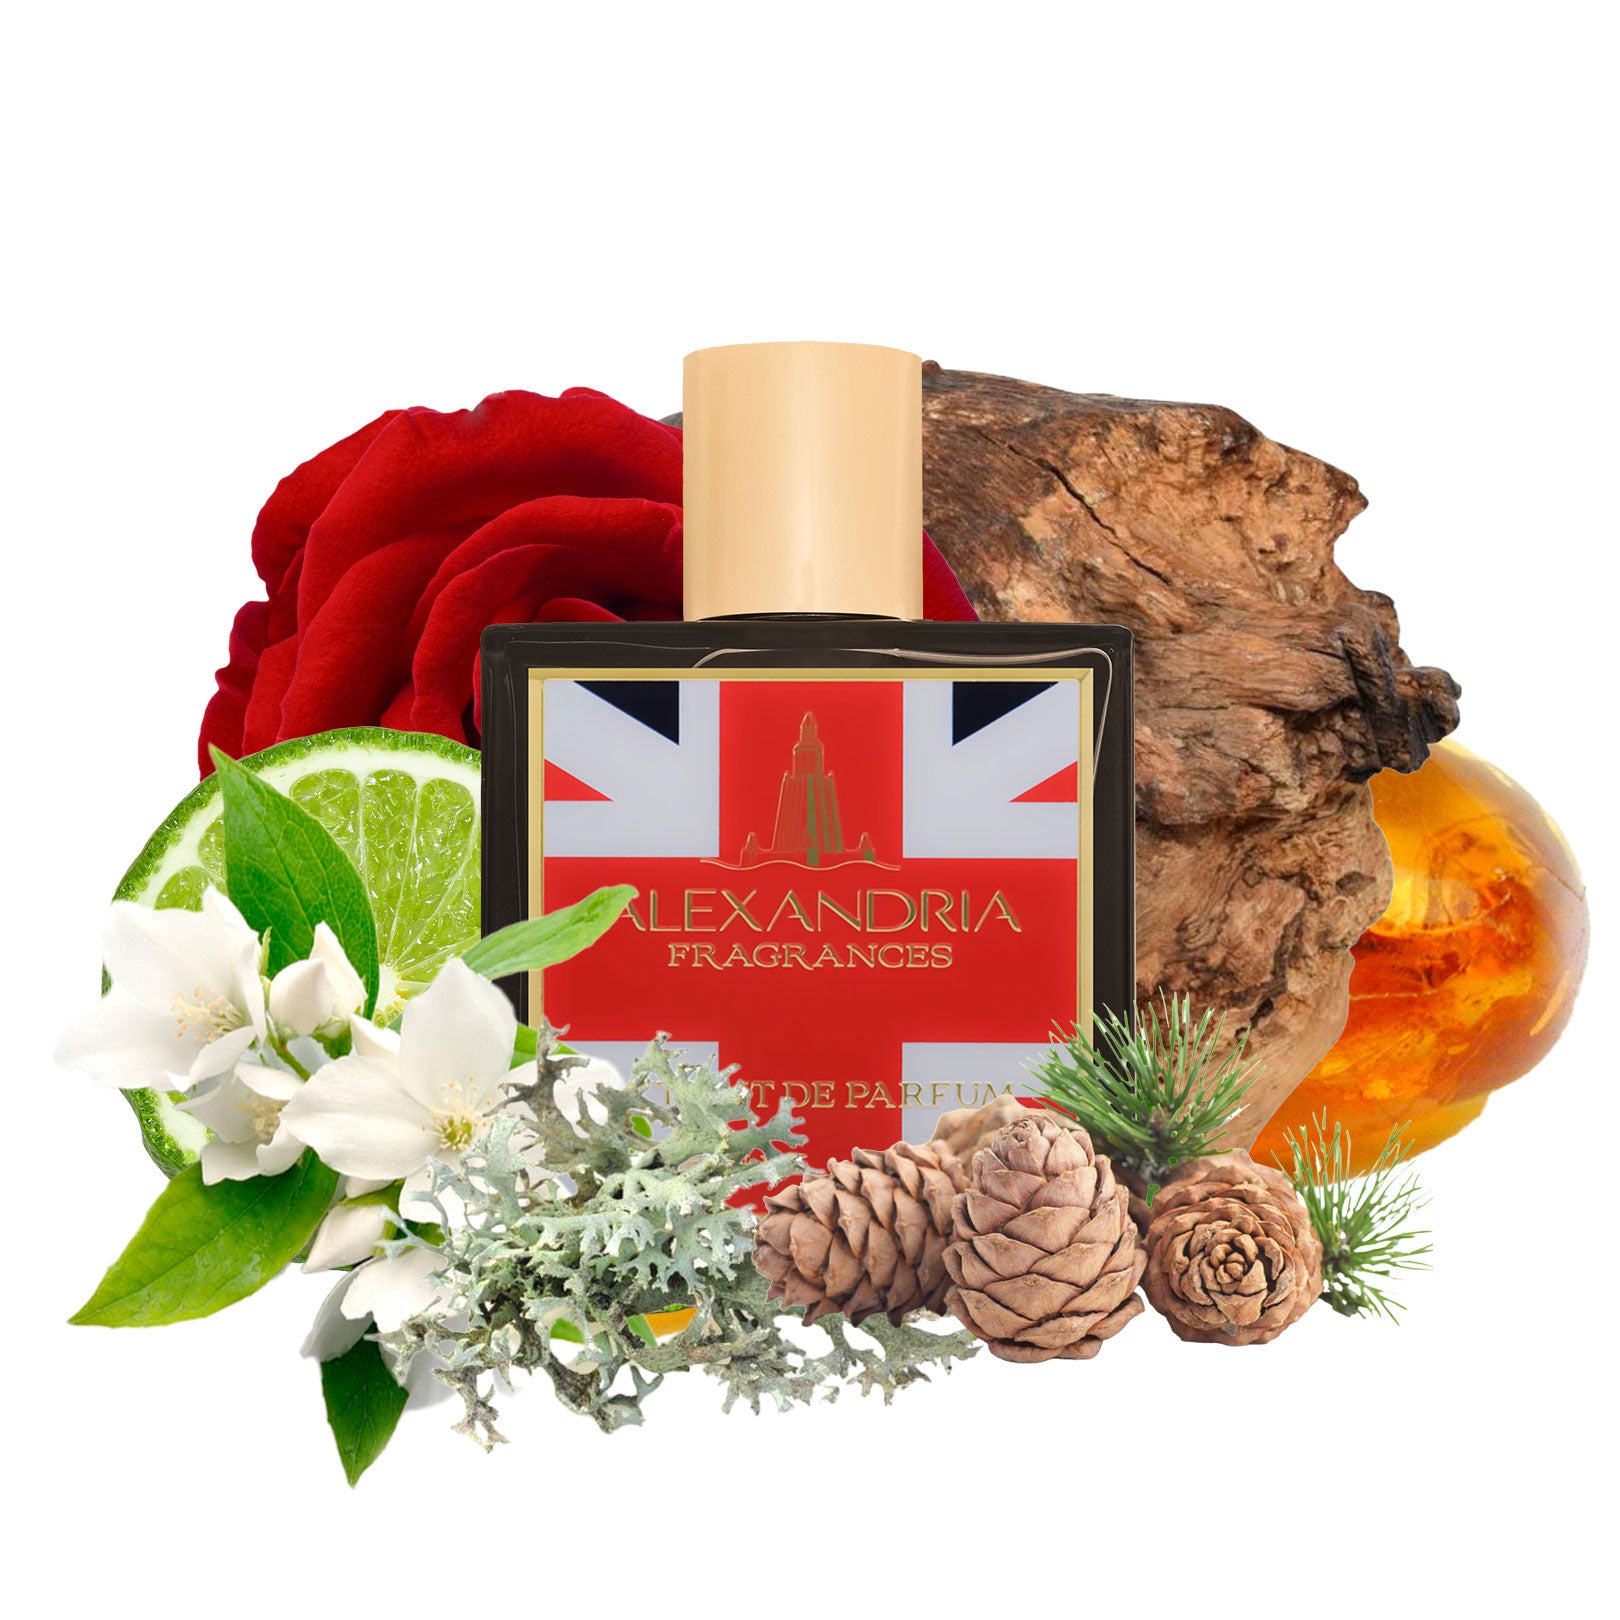 Amazing Chypre inspired by Roja Dove's Chypre Extraordinaire. (Uk Exclusive)